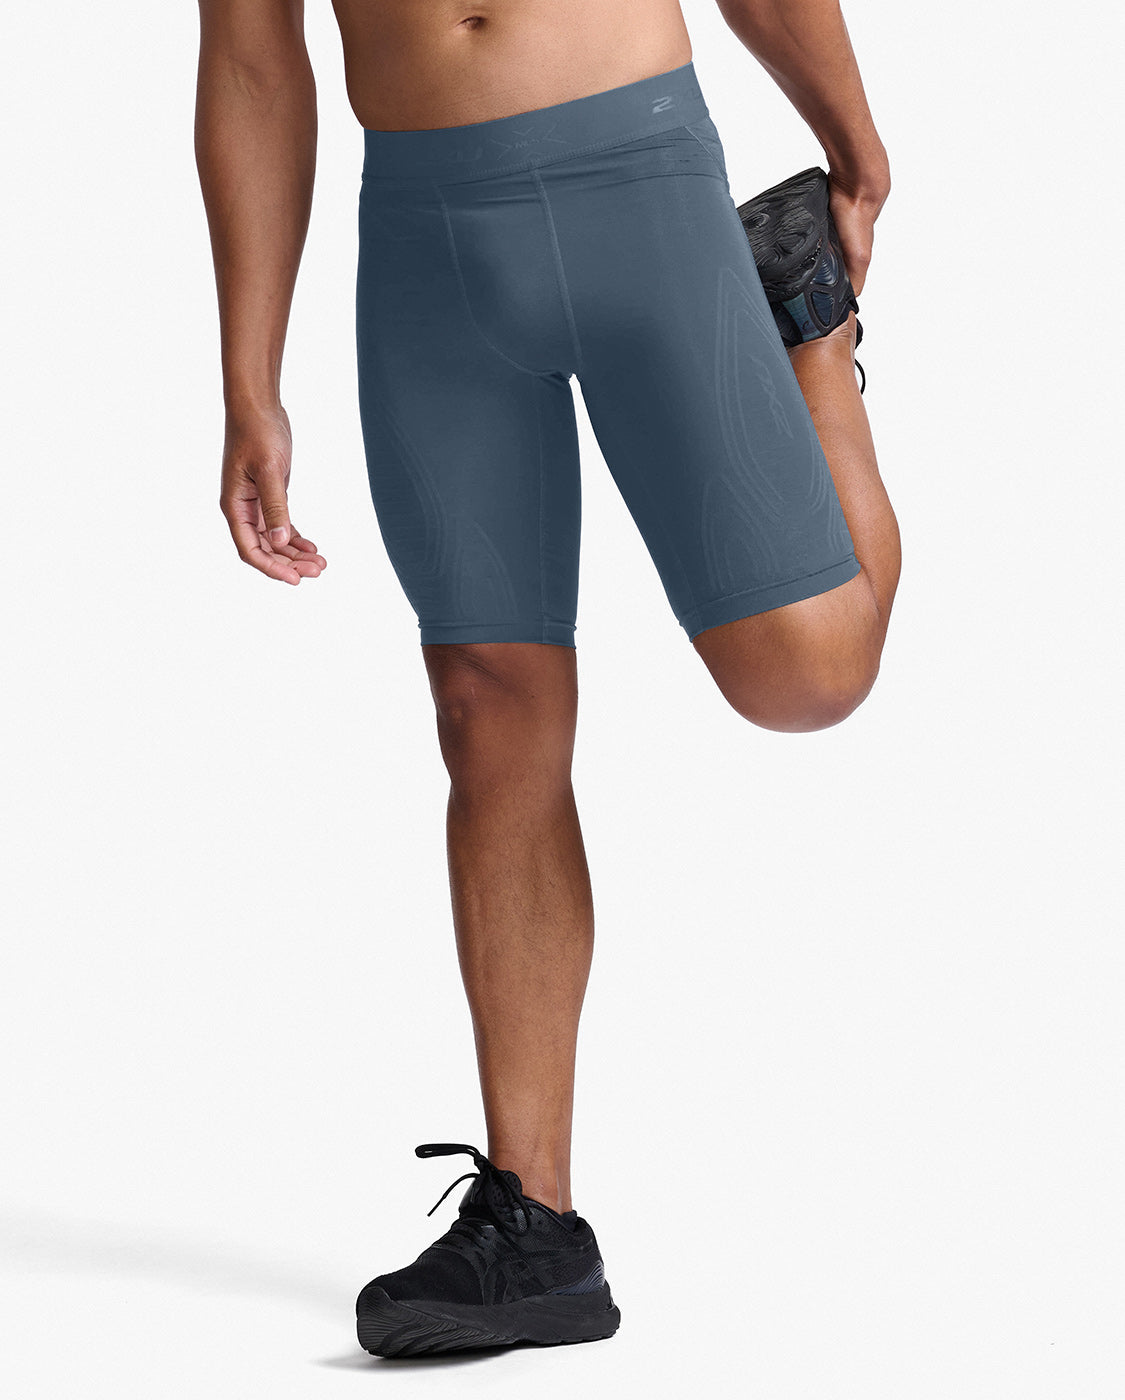 Force Compression Shorts